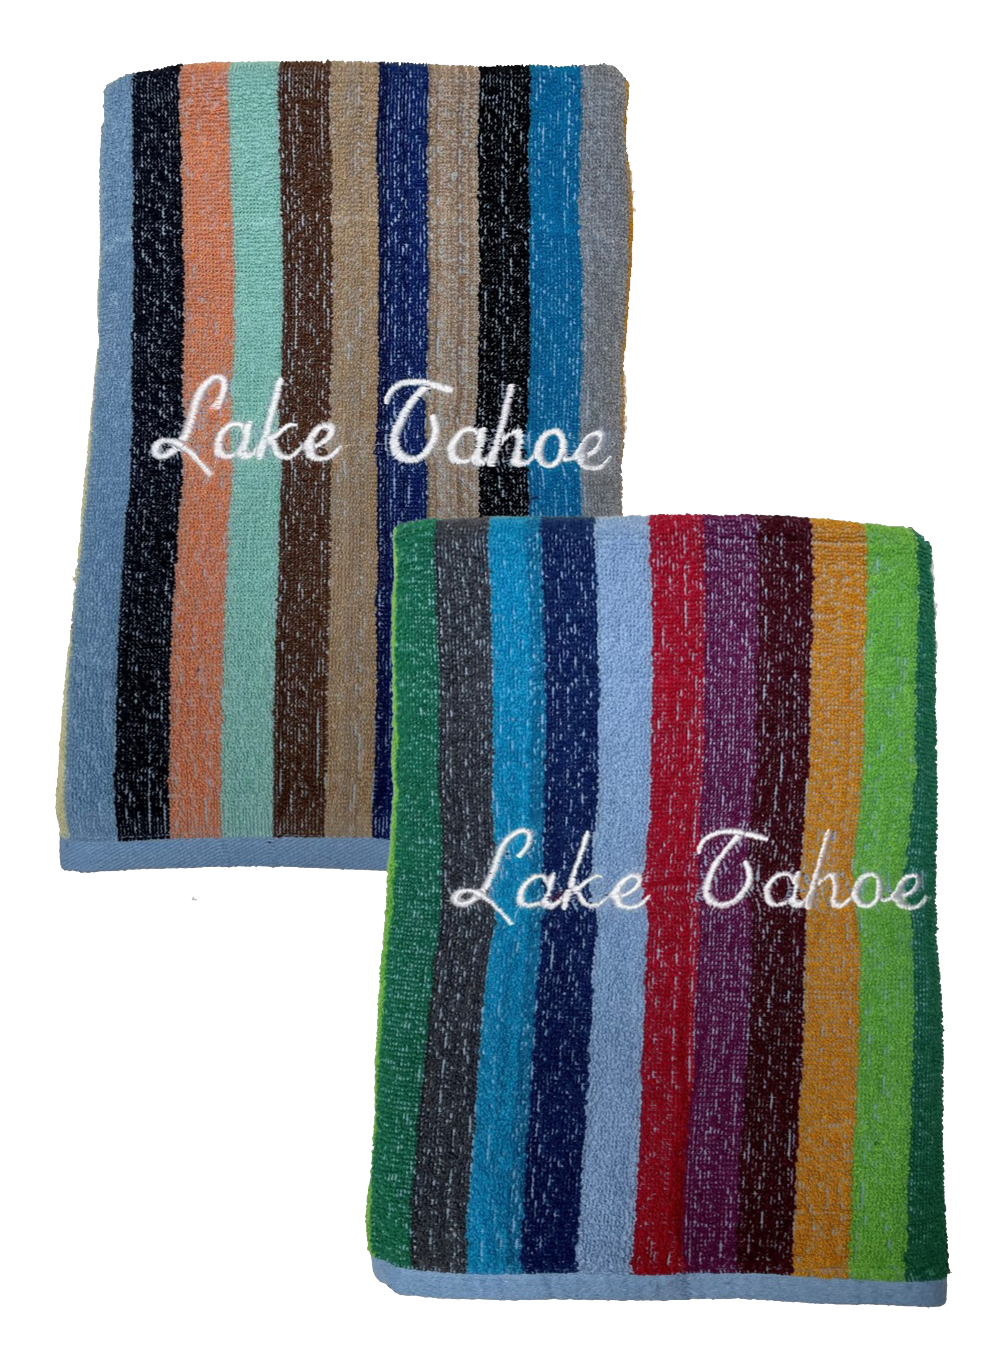 Beach and Boat Gear TOWEL multi-stripe Embroidered Lake Tahoe